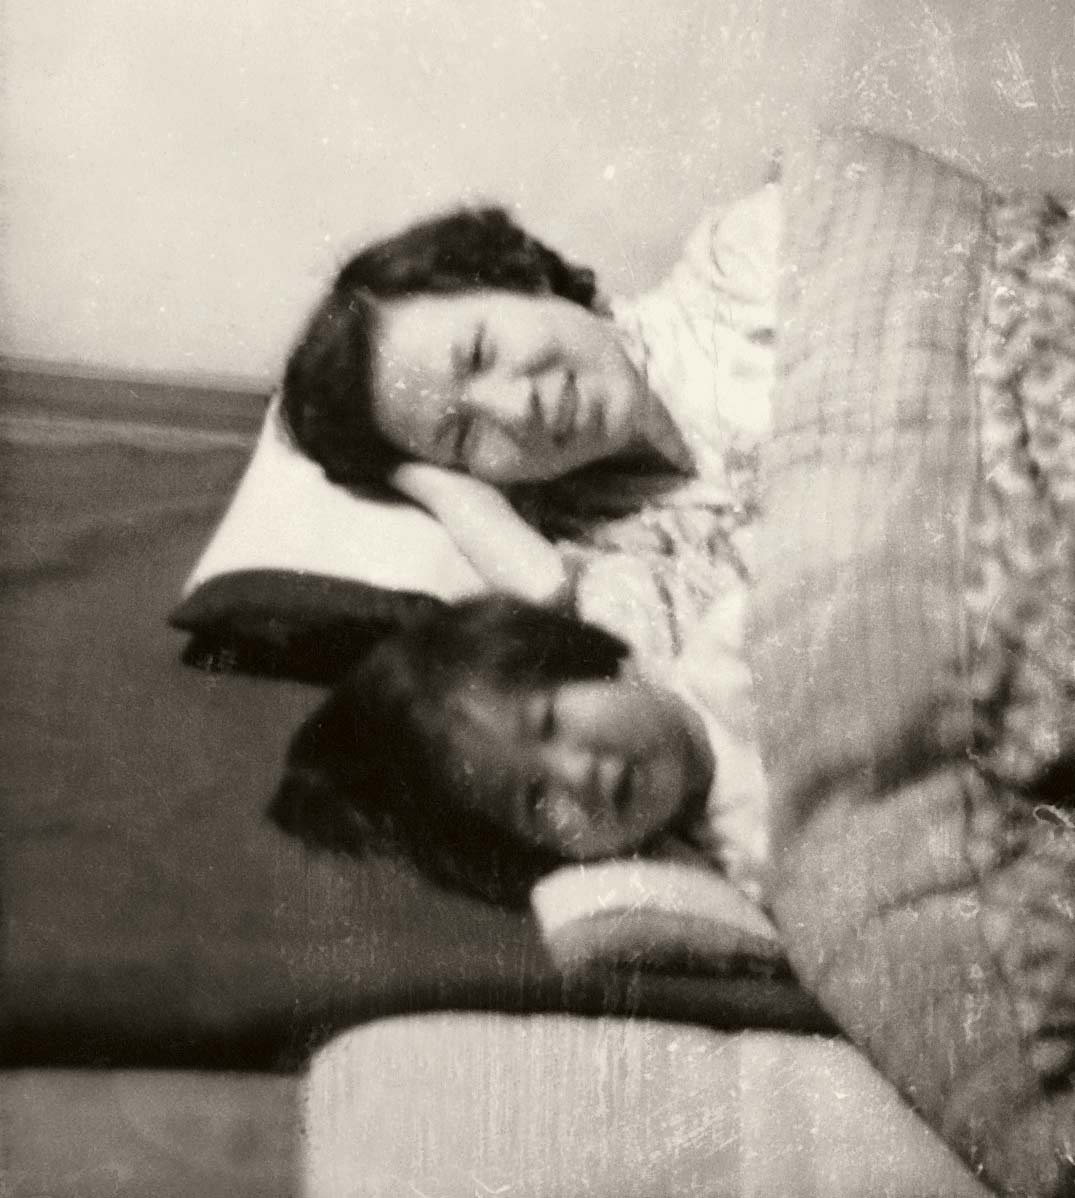 With Mother, 1954